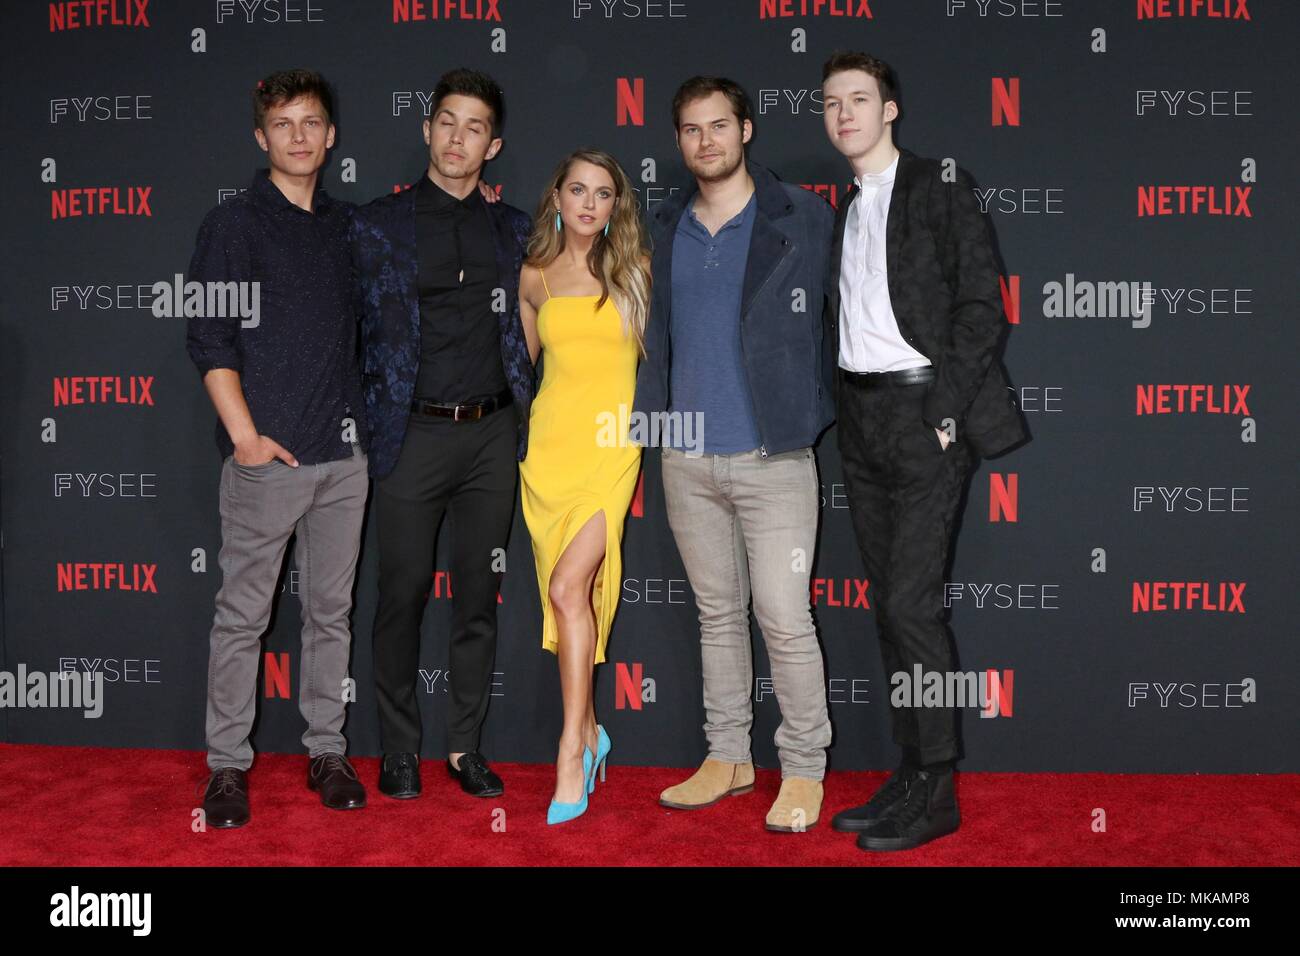 Los Angeles, CA, USA. 6th May, 2018. 13 Reasons Why Cast Members, Anne Winters at arrivals for Netflix #FYSEE Kick-Off Event, Raleigh Studios, Los Angeles, CA May 6, 2018. Credit: Priscilla Grant/Everett Collection/Alamy Live News Stock Photo